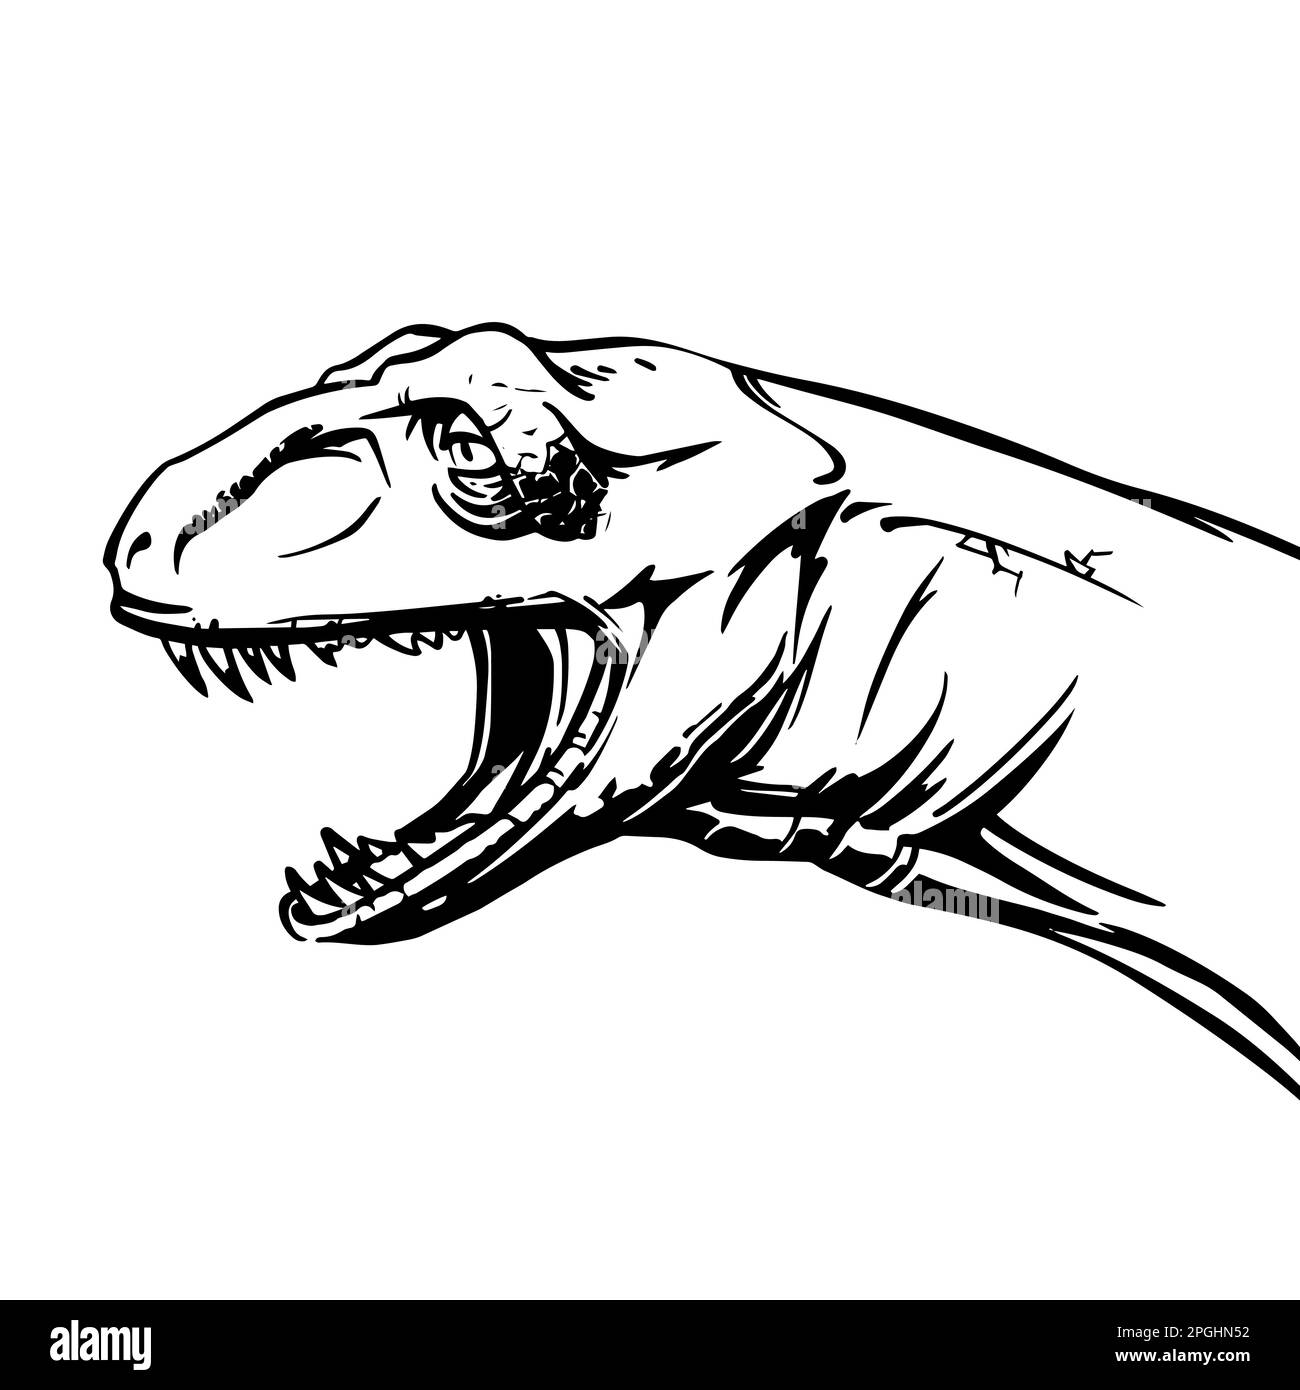 Drawn dinosaur head isolated on white background for print and design. Vector illustration. Stock Vector